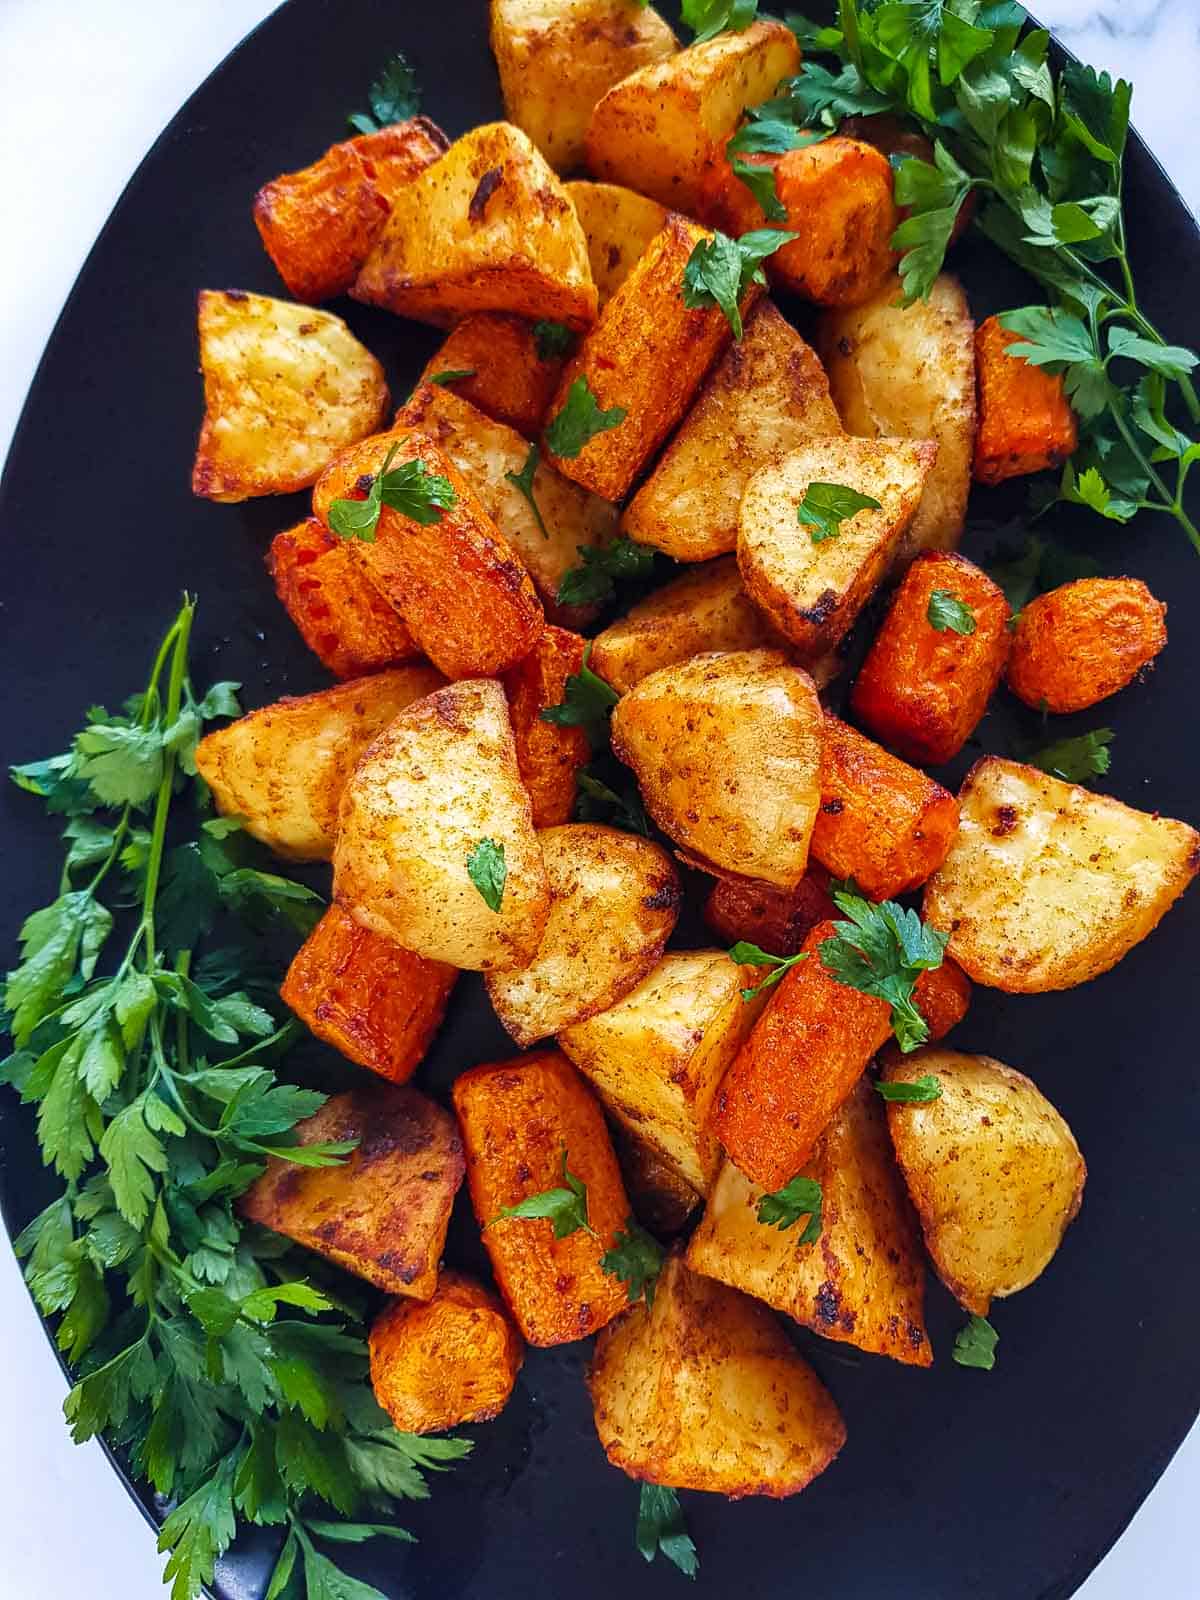 Roasted potatoes and carrots on a serving platter.